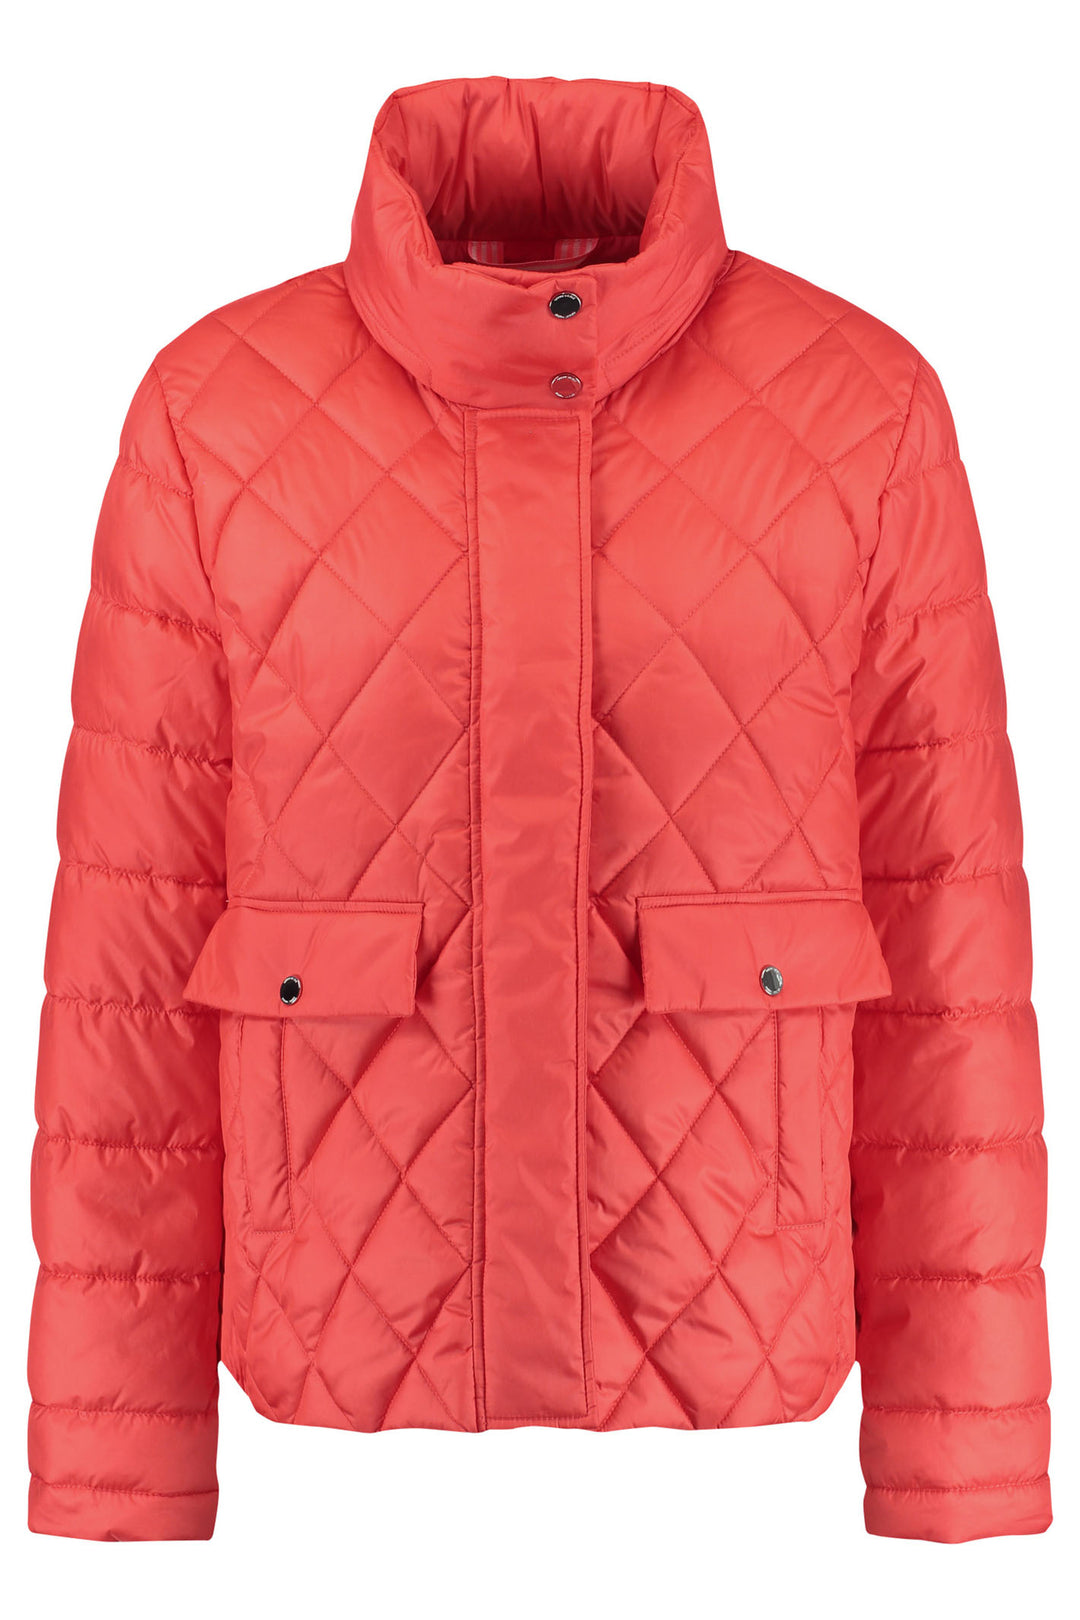 Gerry Weber 350200 Hibiscus Diamond Quilt Padded Coat - Experience Boutique